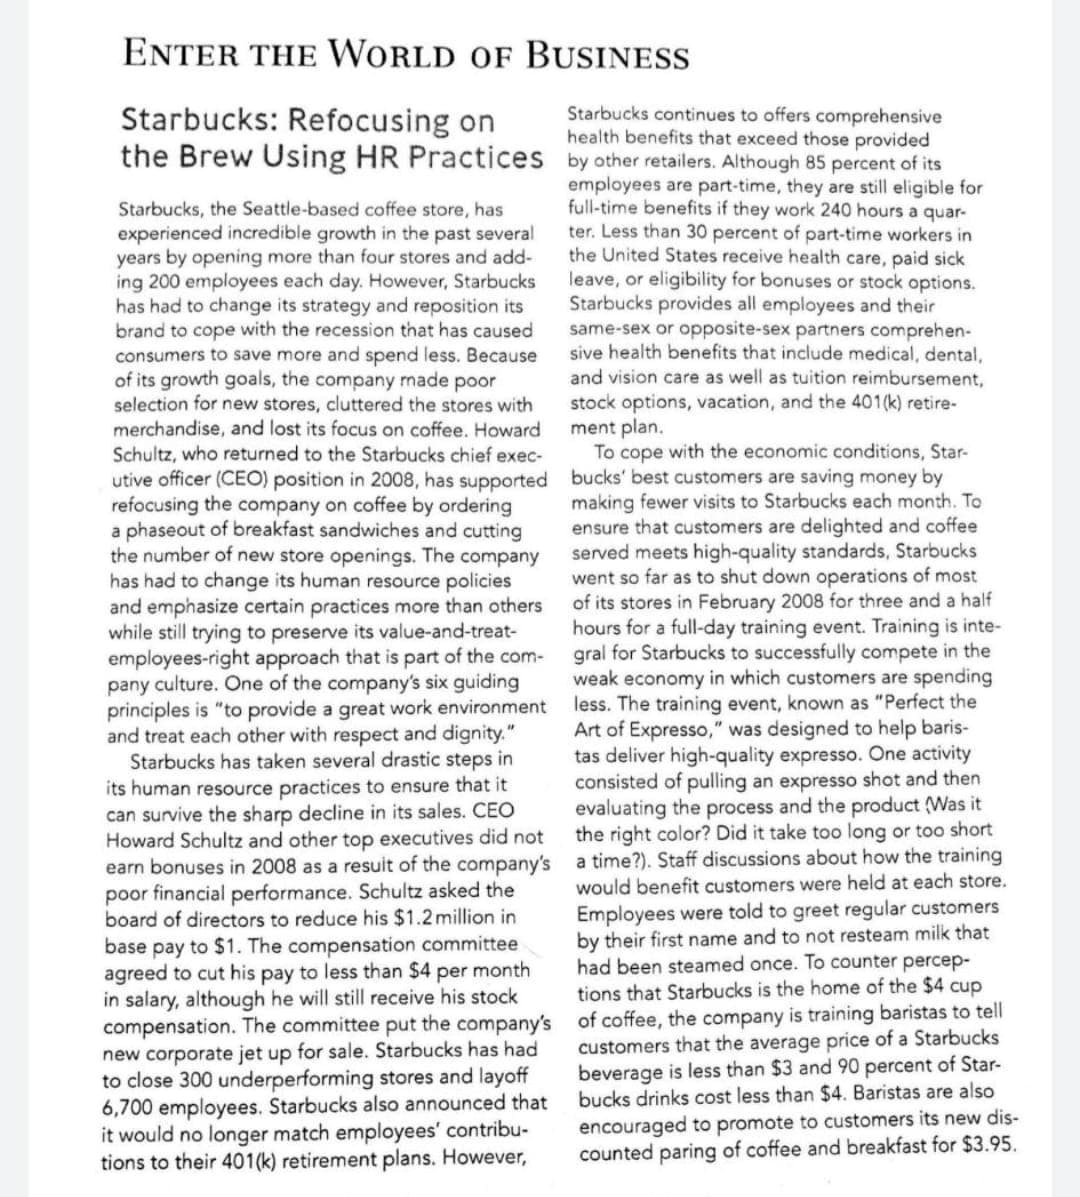 ENTER THE WORLD OF BUSINESS
Starbucks: Refocusing on
the Brew Using HR Practices by other retailers. Although 85 percent of its
Starbucks continues to offers comprehensive
health benefits that exceed those provided
employees are part-time, they are still eligible for
full-time benefits if they work 240 hours a quar-
ter. Less than 30 percent of part-time workers in
the United States receive health care, paid sick
leave, or eligibility for bonuses or stock options.
Starbucks provides all employees and their
same-sex or opposite-sex partners comprehen-
sive health benefits that include medical, dental,
and vision care as well as tuition reimbursement,
stock options, vacation, and the 401(k) retire-
ment plan.
To cope with the economic conditions, Star-
Starbucks, the Seattle-based coffee store, has
experienced incredible growth in the past several
years by opening more than four stores and add-
ing 200 employees each day. However, Starbucks
has had to change its strategy and reposition its
brand to cope with the recession that has caused
consumers to save more and spend less. Because
of its growth goals, the company made poor
selection for new stores, cluttered the stores with
merchandise, and lost its focus on coffee. Howard
Schultz, who returned to the Starbucks chief exec-
utive officer (CEO) position in 2008, has supported bucks' best customers are saving money by
refocusing the company on coffee by ordering
a phaseout of breakfast sandwiches and cutting
the number of new store openings. The company
has had to change its human resource policies
and emphasize certain practices more than others
while still trying to preserve its value-and-treat-
employees-right approach that is part of the com-
pany culture. One of the company's six guiding
principles is "to provide a great work environment less. The training event, known as "Perfect the
and treat each other with respect and dignity."
Starbucks has taken several drastic steps in
its human resource practices to ensure that it
can survive the sharp decline in its sales. CEO
Howard Schultz and other top executives did not
earn bonuses in 2008 as a resuit of the company's a time?). Staff discussions about how the training
poor financial performance. Schultz asked the
board of directors to reduce his $1.2million in
base pay to $1. The compensation committee
agreed to cut his pay to less than $4 per month
in salary, although he will still receive his stock
compensation. The committee put the company's of coffee, the company is training baristas to tell
new corporate jet up for sale. Starbucks has had
to close 300 underperforming stores and layoff
6,700 employees. Starbucks also announced that
it would no longer match employees' contribu-
tions to their 401(k) retirement plans. However,
making fewer visits to Starbucks each month. To
ensure that customers are delighted and coffee
served meets high-quality standards, Starbucks
went so far as to shut down operations of most
of its stores in February 2008 for three and a half
hours for a full-day training event. Training is inte-
gral for Starbucks to successfully compete in the
weak economy in which customers are spending
Art of Expresso," was designed to help baris-
tas deliver high-quality expresso. One activity
consisted of pulling an expresso shot and then
evaluating the process and the product (Was it
the right color? Did it take too long or too short
would benefit customers were held at each store.
Employees were told to greet regular customers
by their first name and to not resteam milk that
had been steamed once. To counter percep-
tions that Starbucks is the home of the $4 cup
customers that the average price of a Starbucks
beverage is less than $3 and 90 percent of Star-
bucks drinks cost less than $4. Baristas are also
encouraged to promote to customers its new dis-
counted paring of coffee and breakfast for $3.95.
